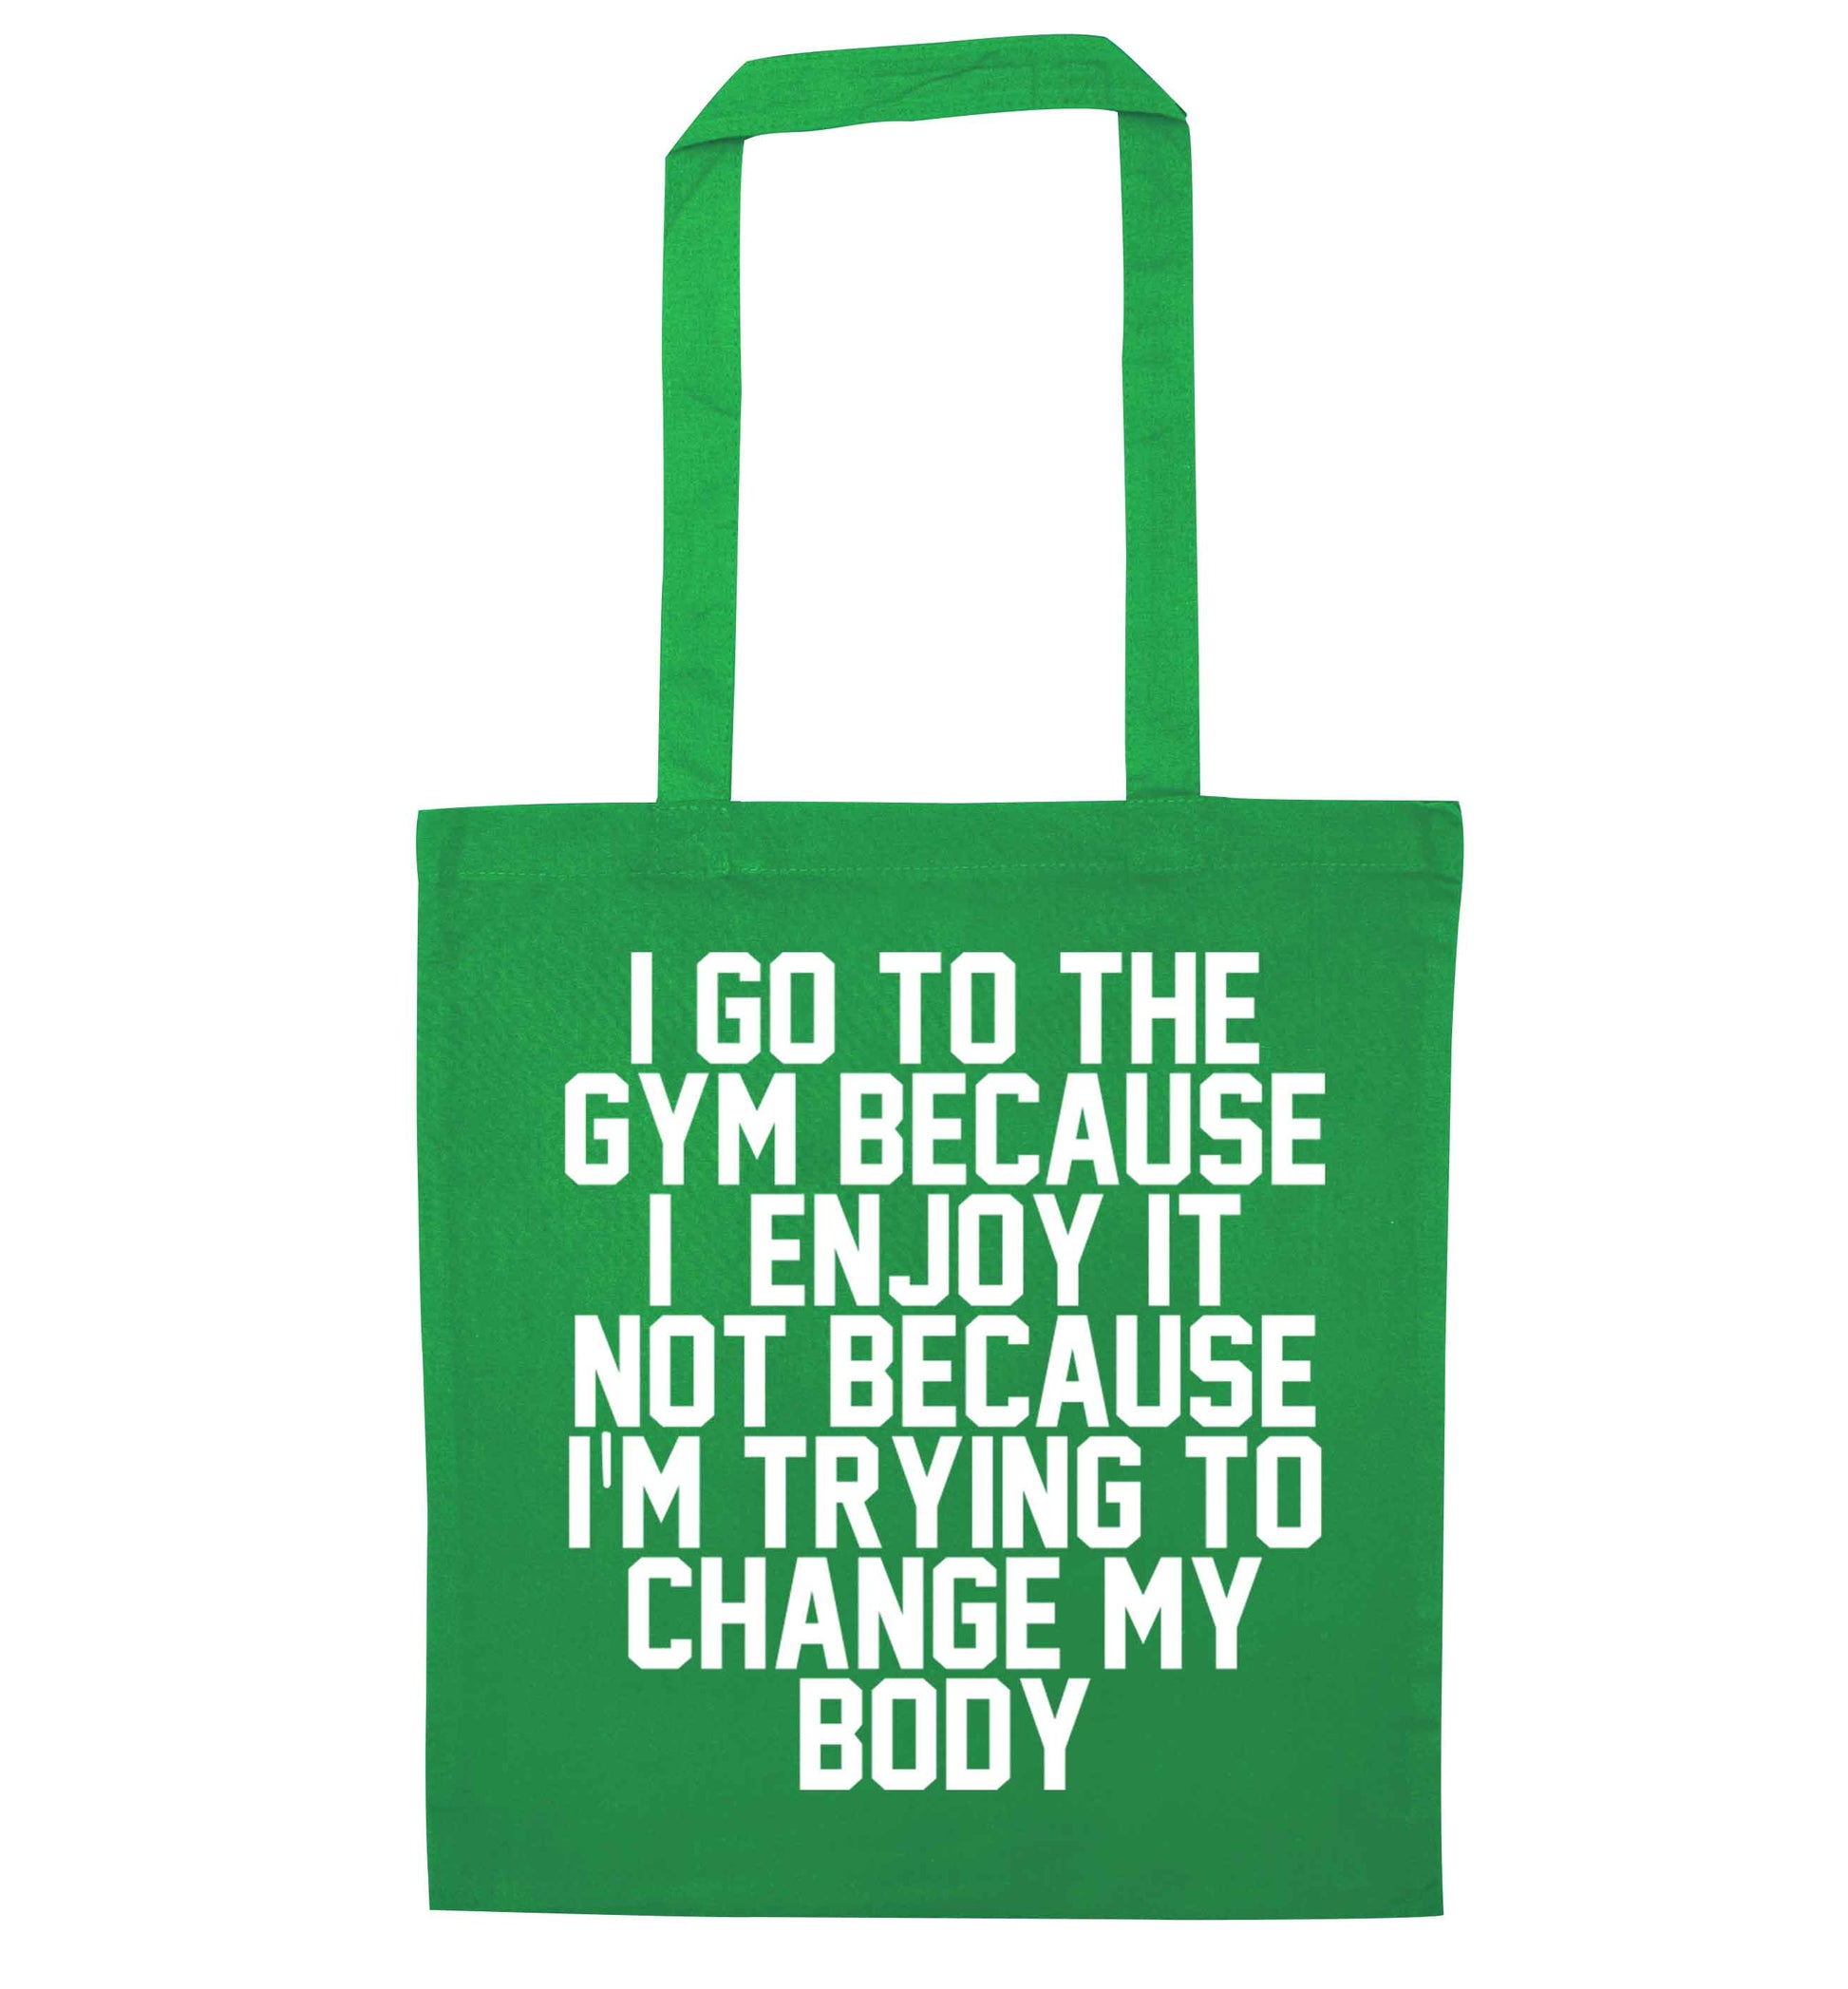 I go to the gym because I enjoy it not because I'm trying to change my body green tote bag